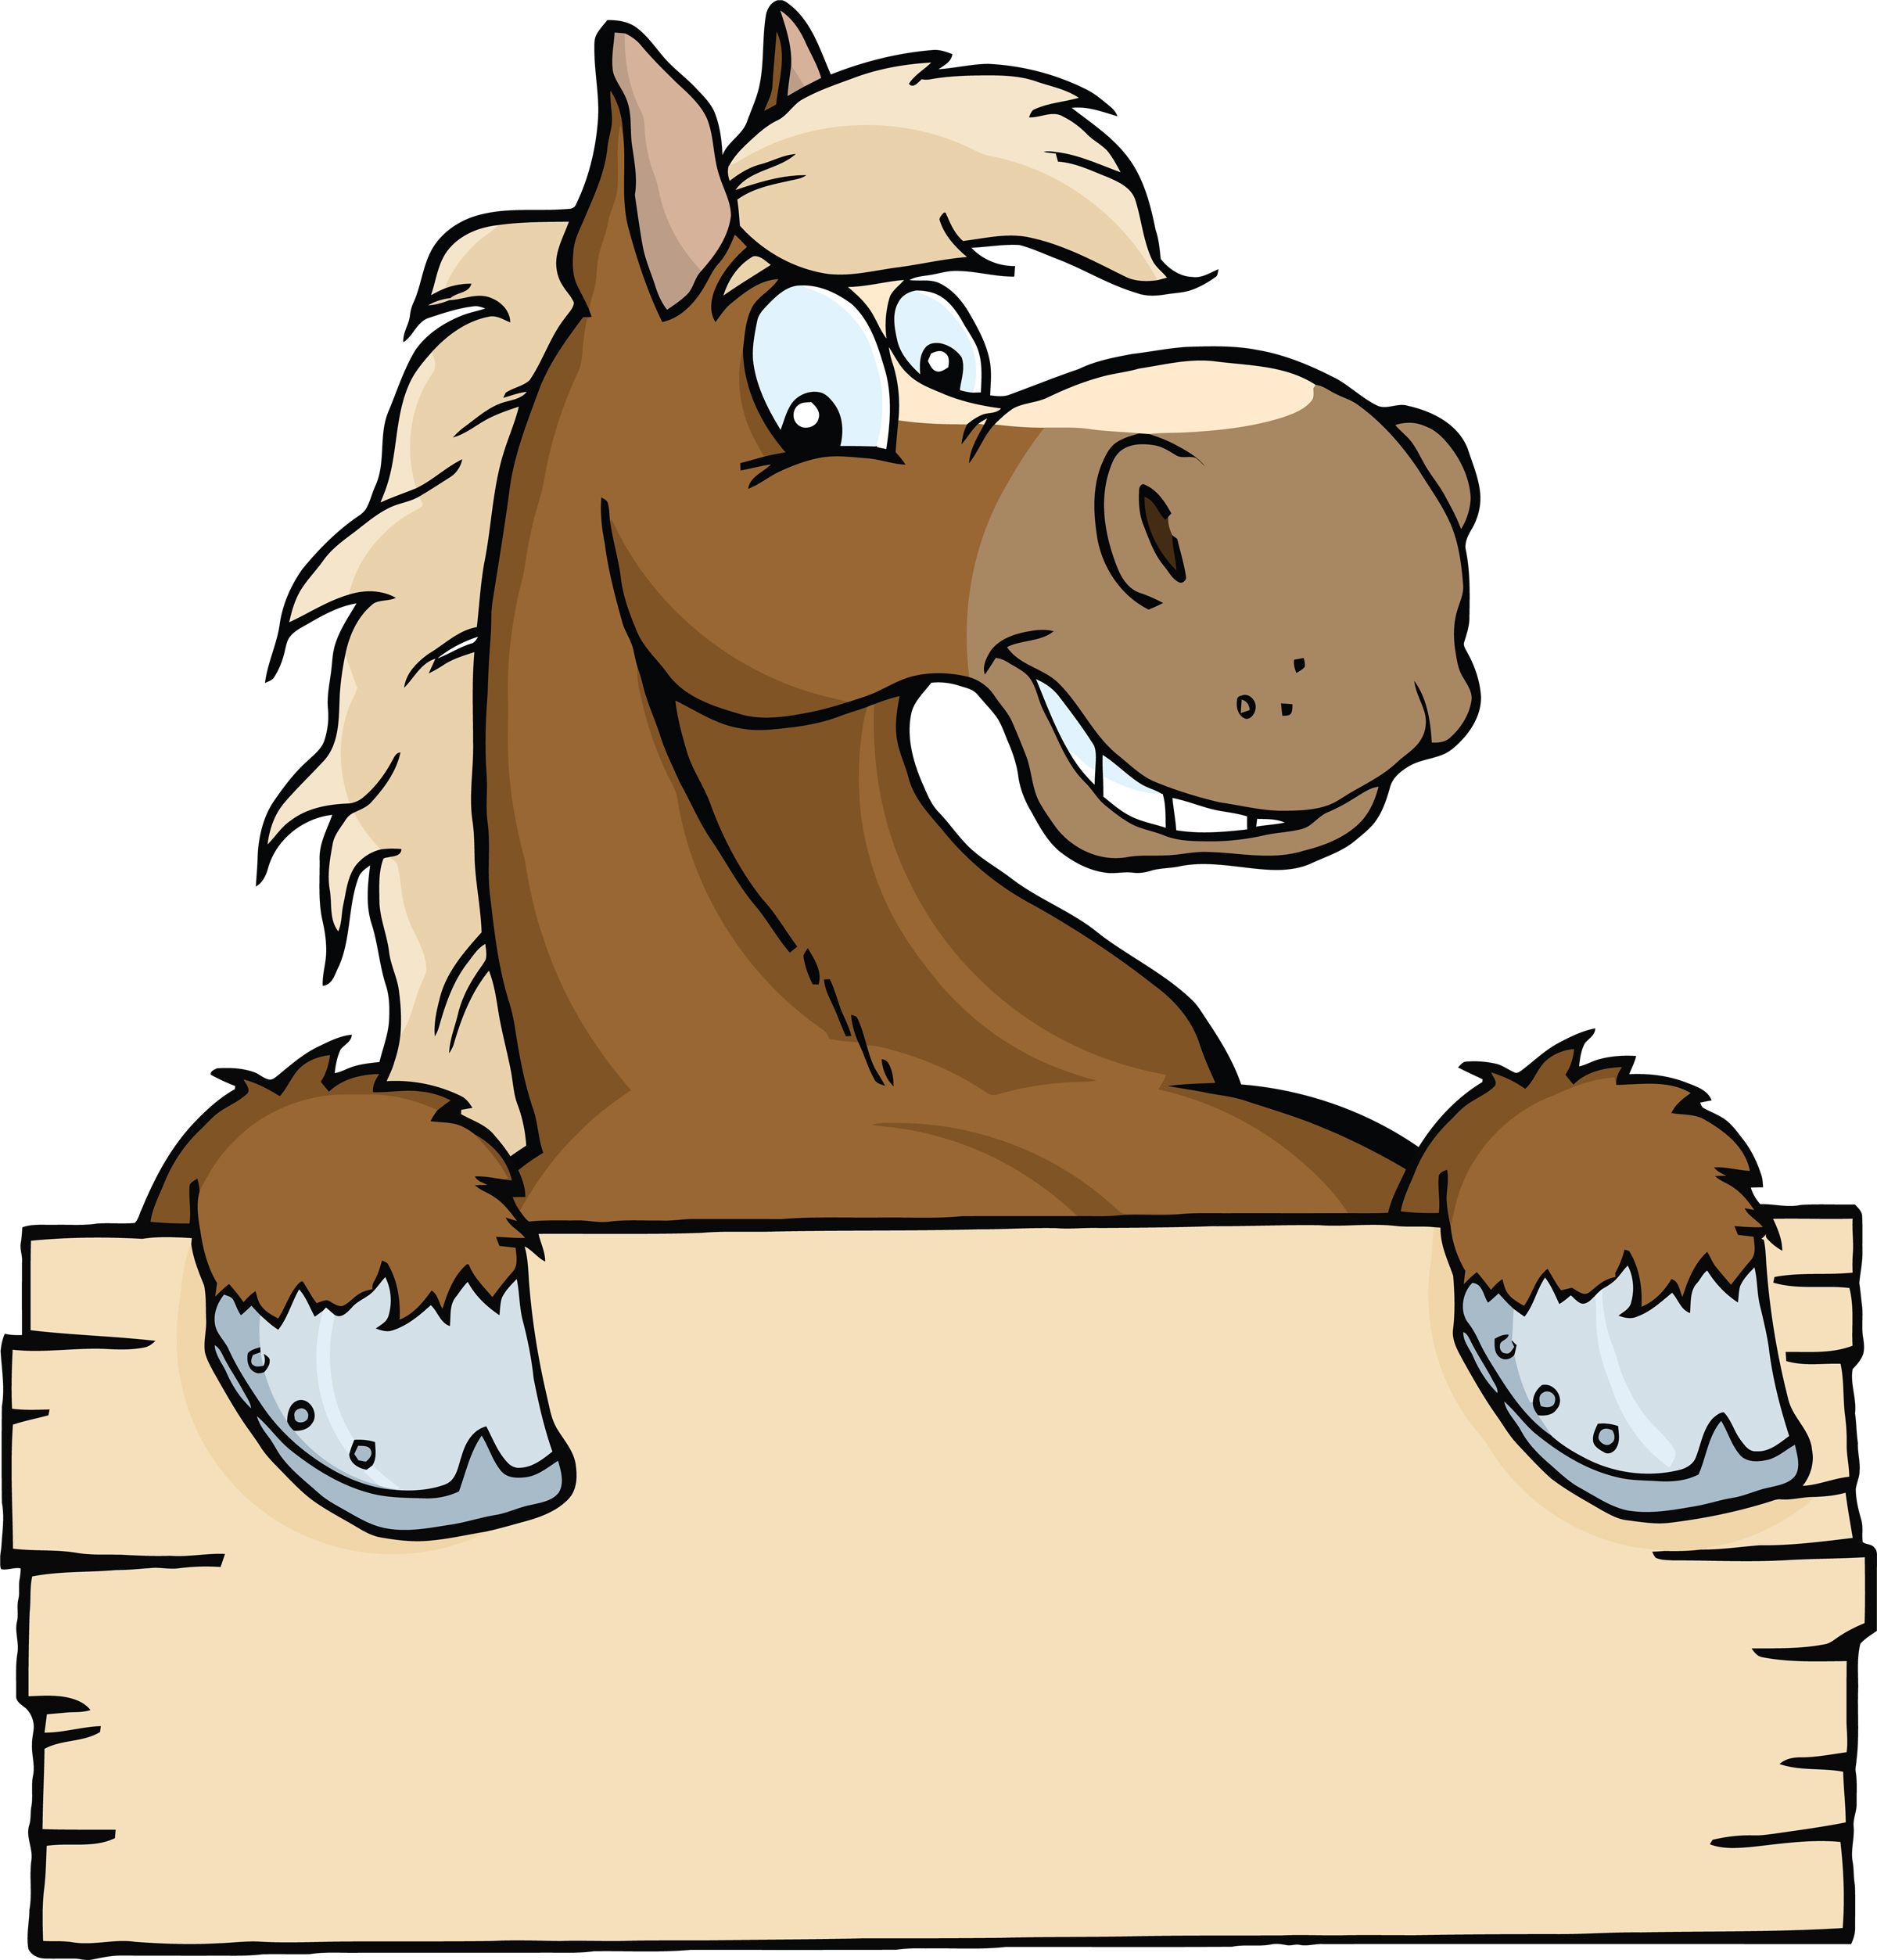 Free Funny Horse Picture Cartoon, Download Free Clip Art, Free